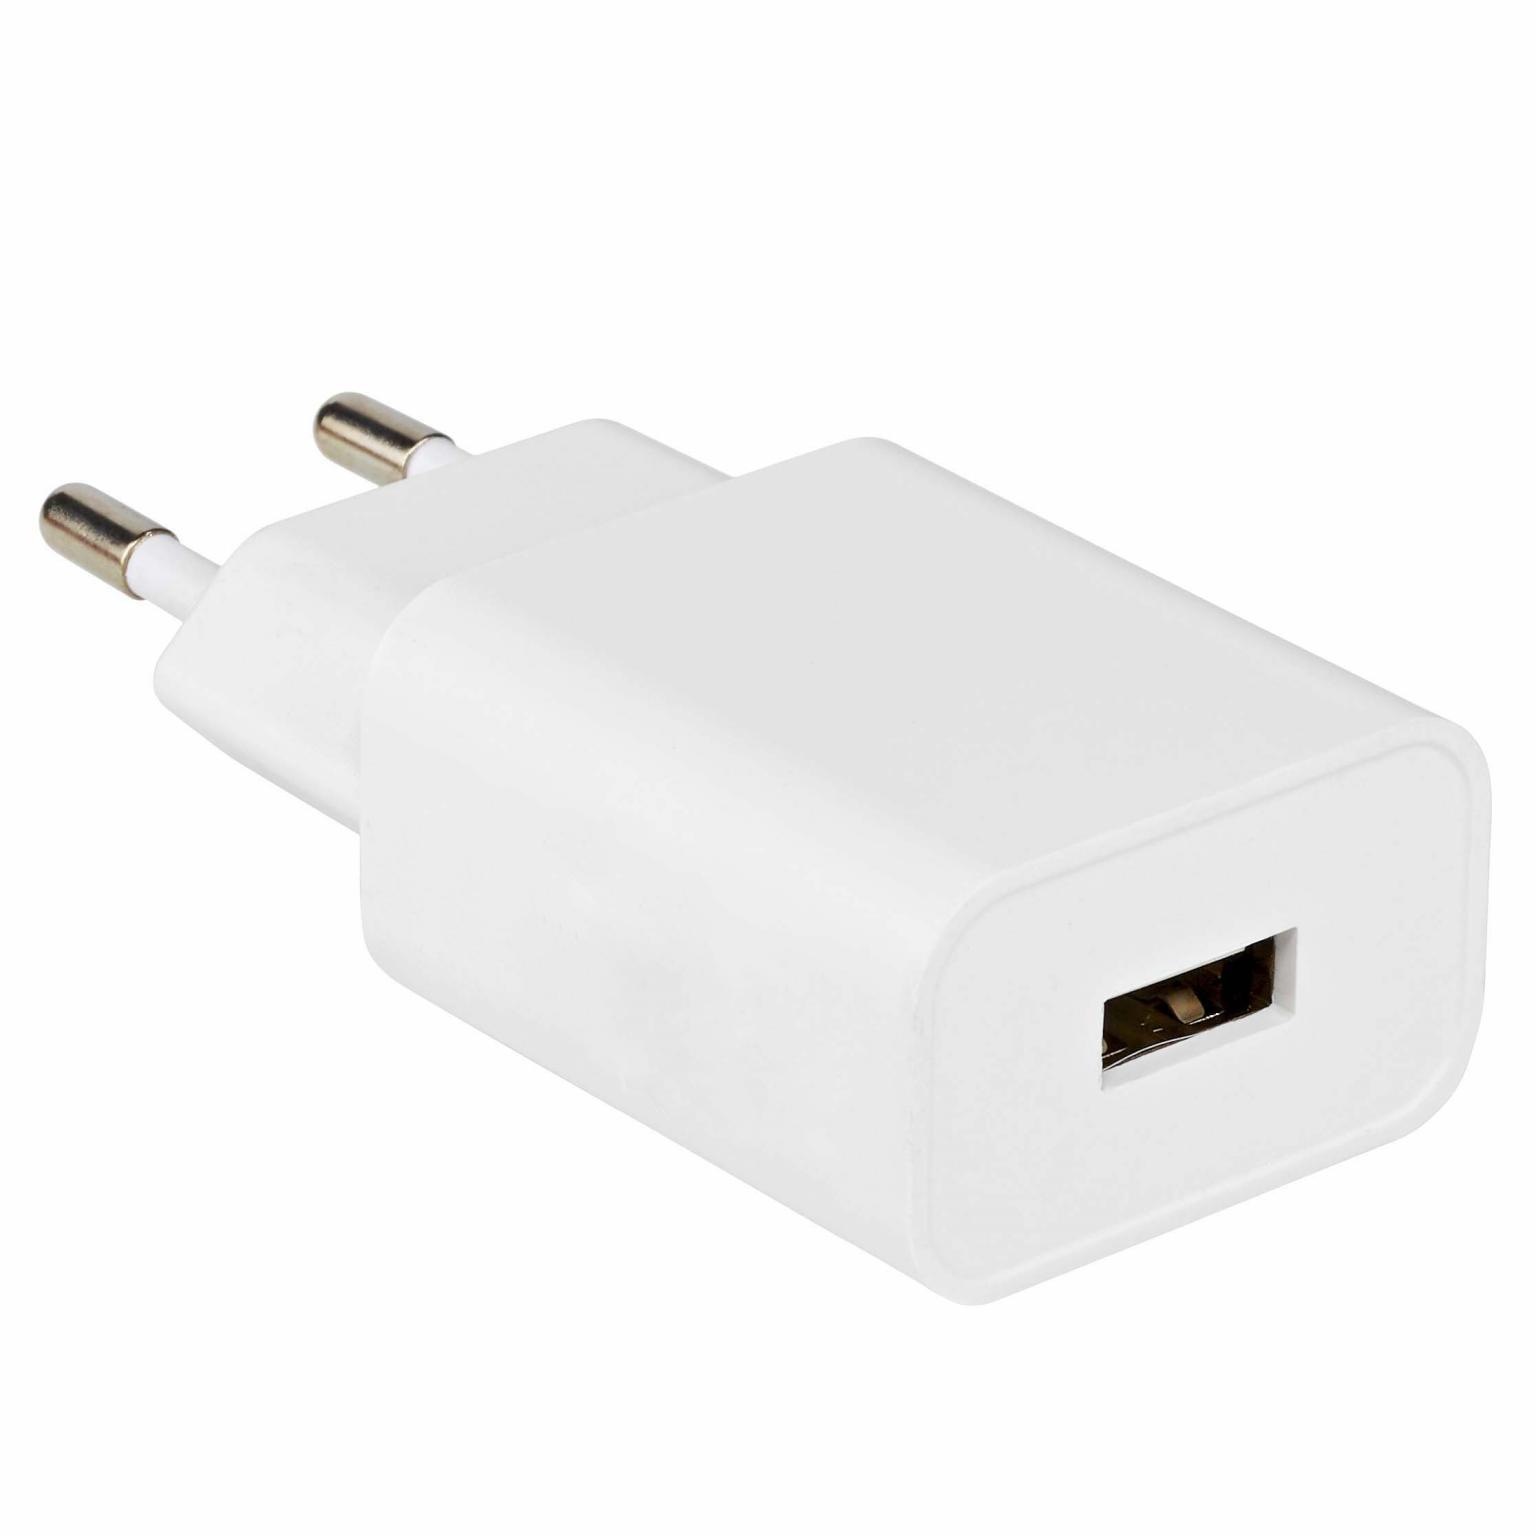 IPhone 4/4s - USB lader - 1.000 mA - Allteq